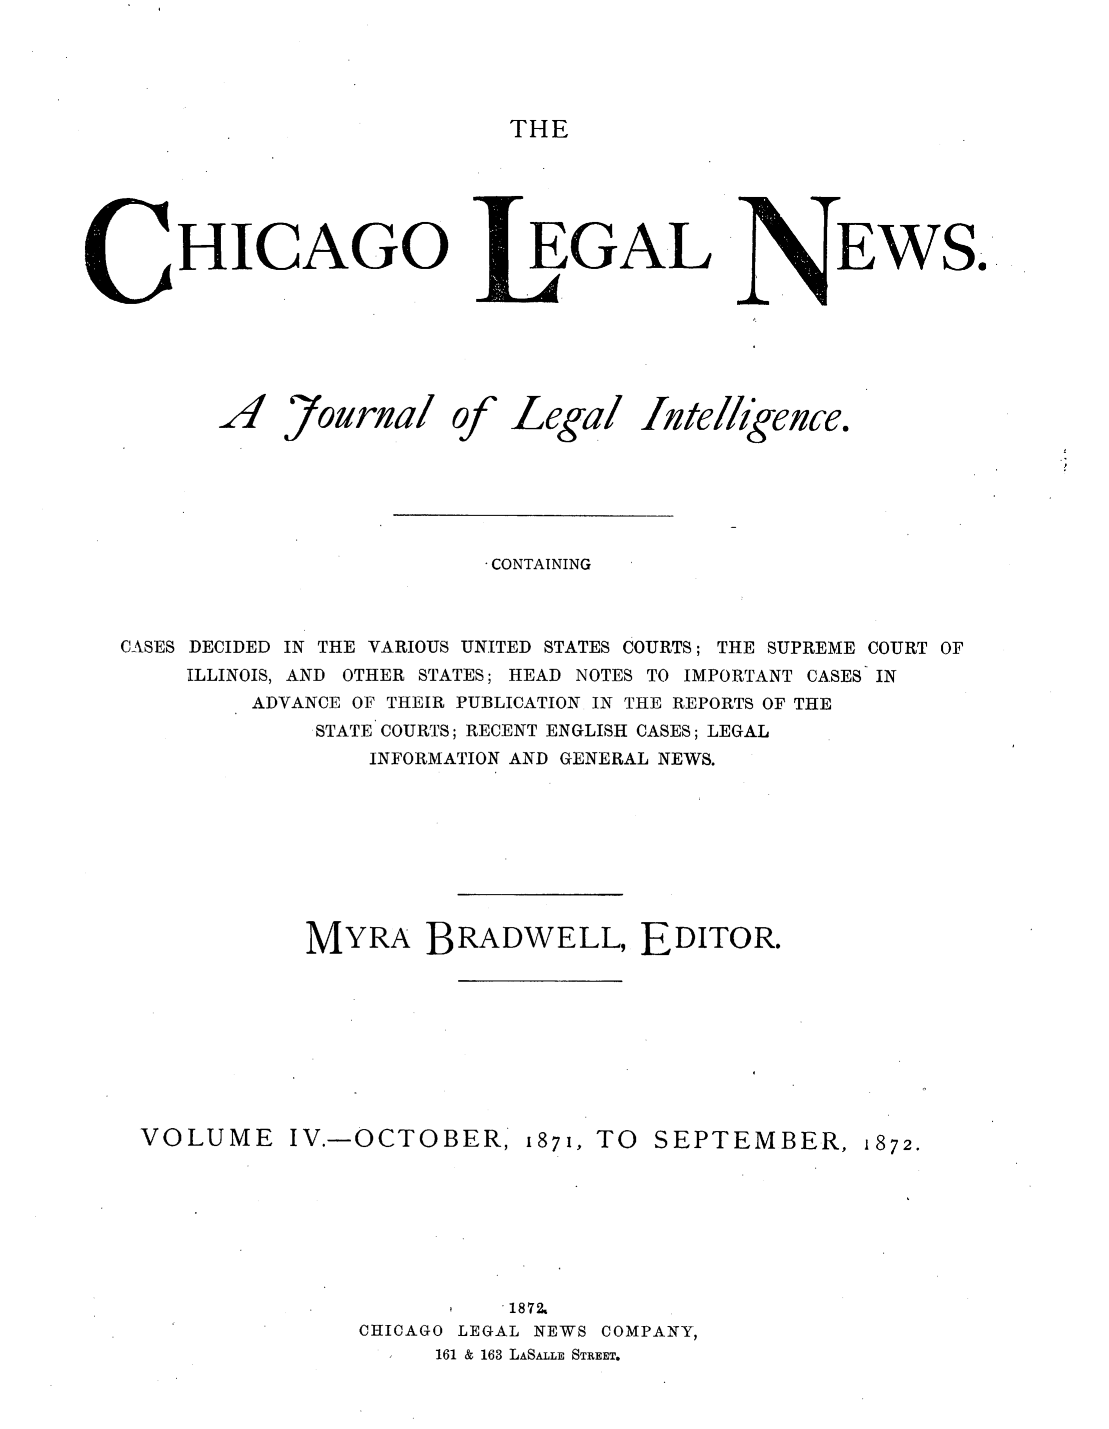 handle is hein.journals/chiclene4 and id is 1 raw text is: THEHICAGOA7ournalofEGALLegal AteEWS.iligence.CONTAININGCASES DECIDED IN THE VARIOUS UNITED STATES COURTS; THE SUPREME COURT OFILLINOIS, AND OTHER STATES; HEAD NOTES TO IMPORTANT CASES INADVANCE OF THEIR PUBLICATION IN THE REPORTS OF THESTATE COURTS; RECENT ENGLISH CASES; LEGALINFORMATION AND GENERAL NEWS.MYRA BRADWELL, EDITOR.VOLUMEIV.-OCTOBER, 1871, TO SEPTEMBER, 1872., 18'72CHICAGO LEGAL NEWS COMPANY,161 & 163 LASALLE STREET.